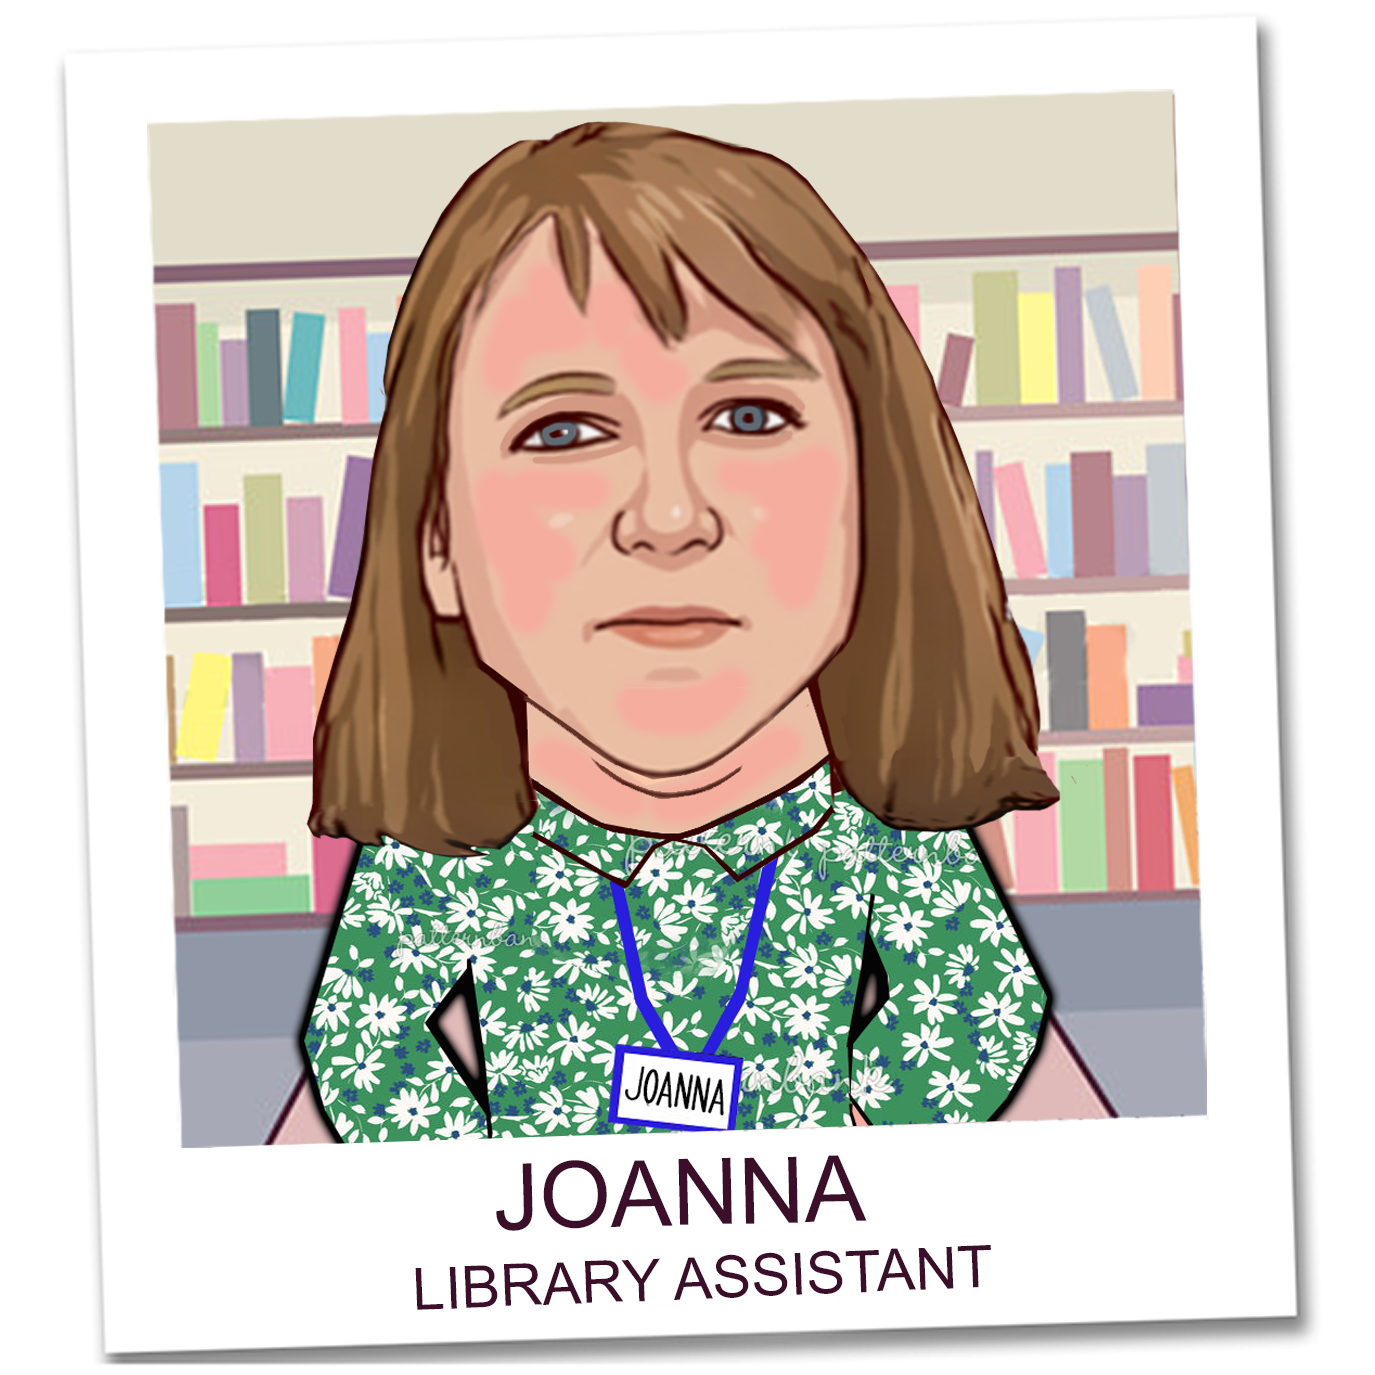 Joanna, Library Assistant